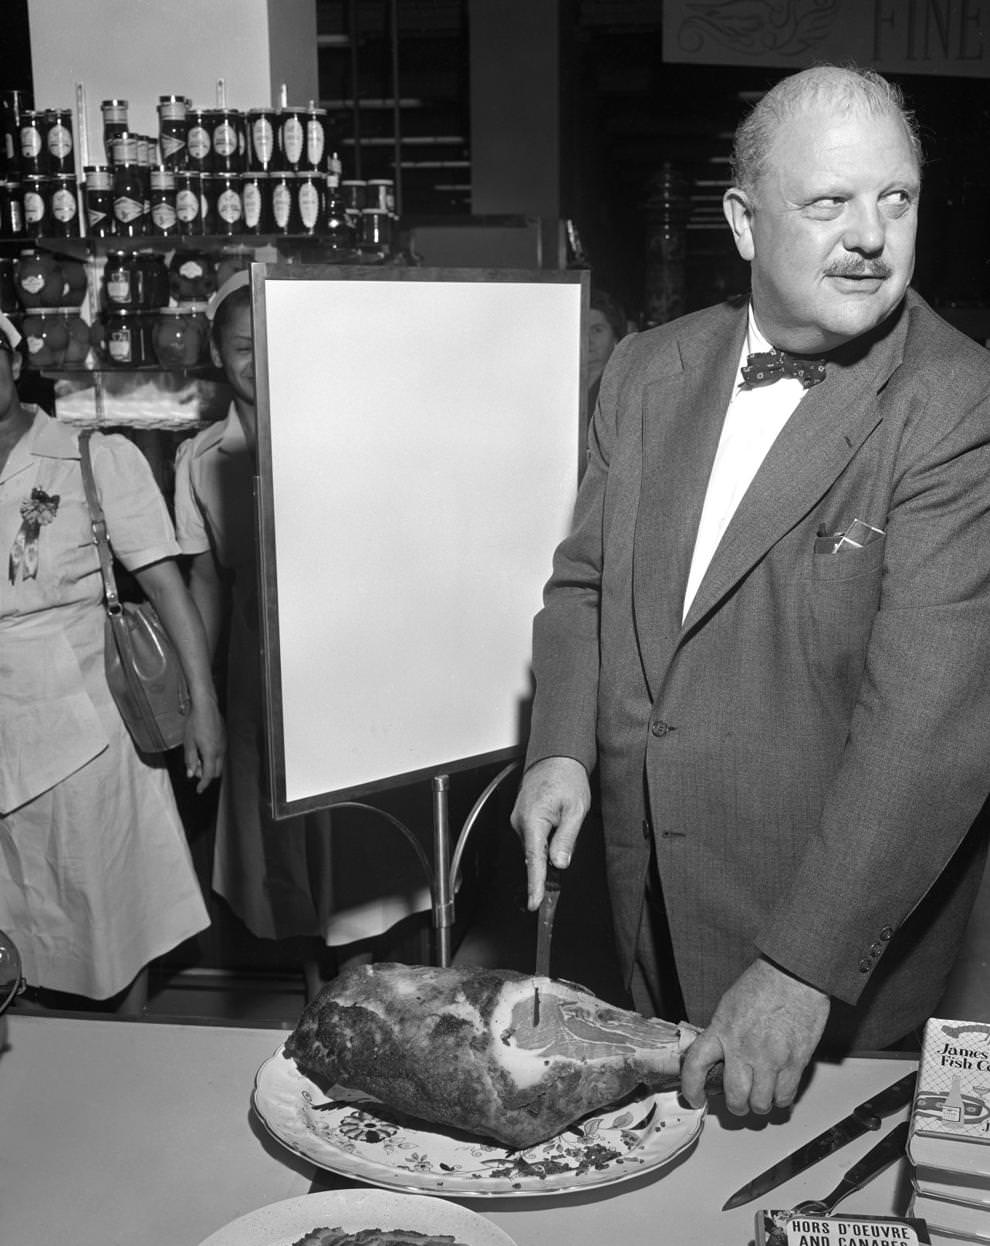 Famed chef James Beard visited Thalhimer's new fine foods shop and conducted cooking demonstrations, 1955.